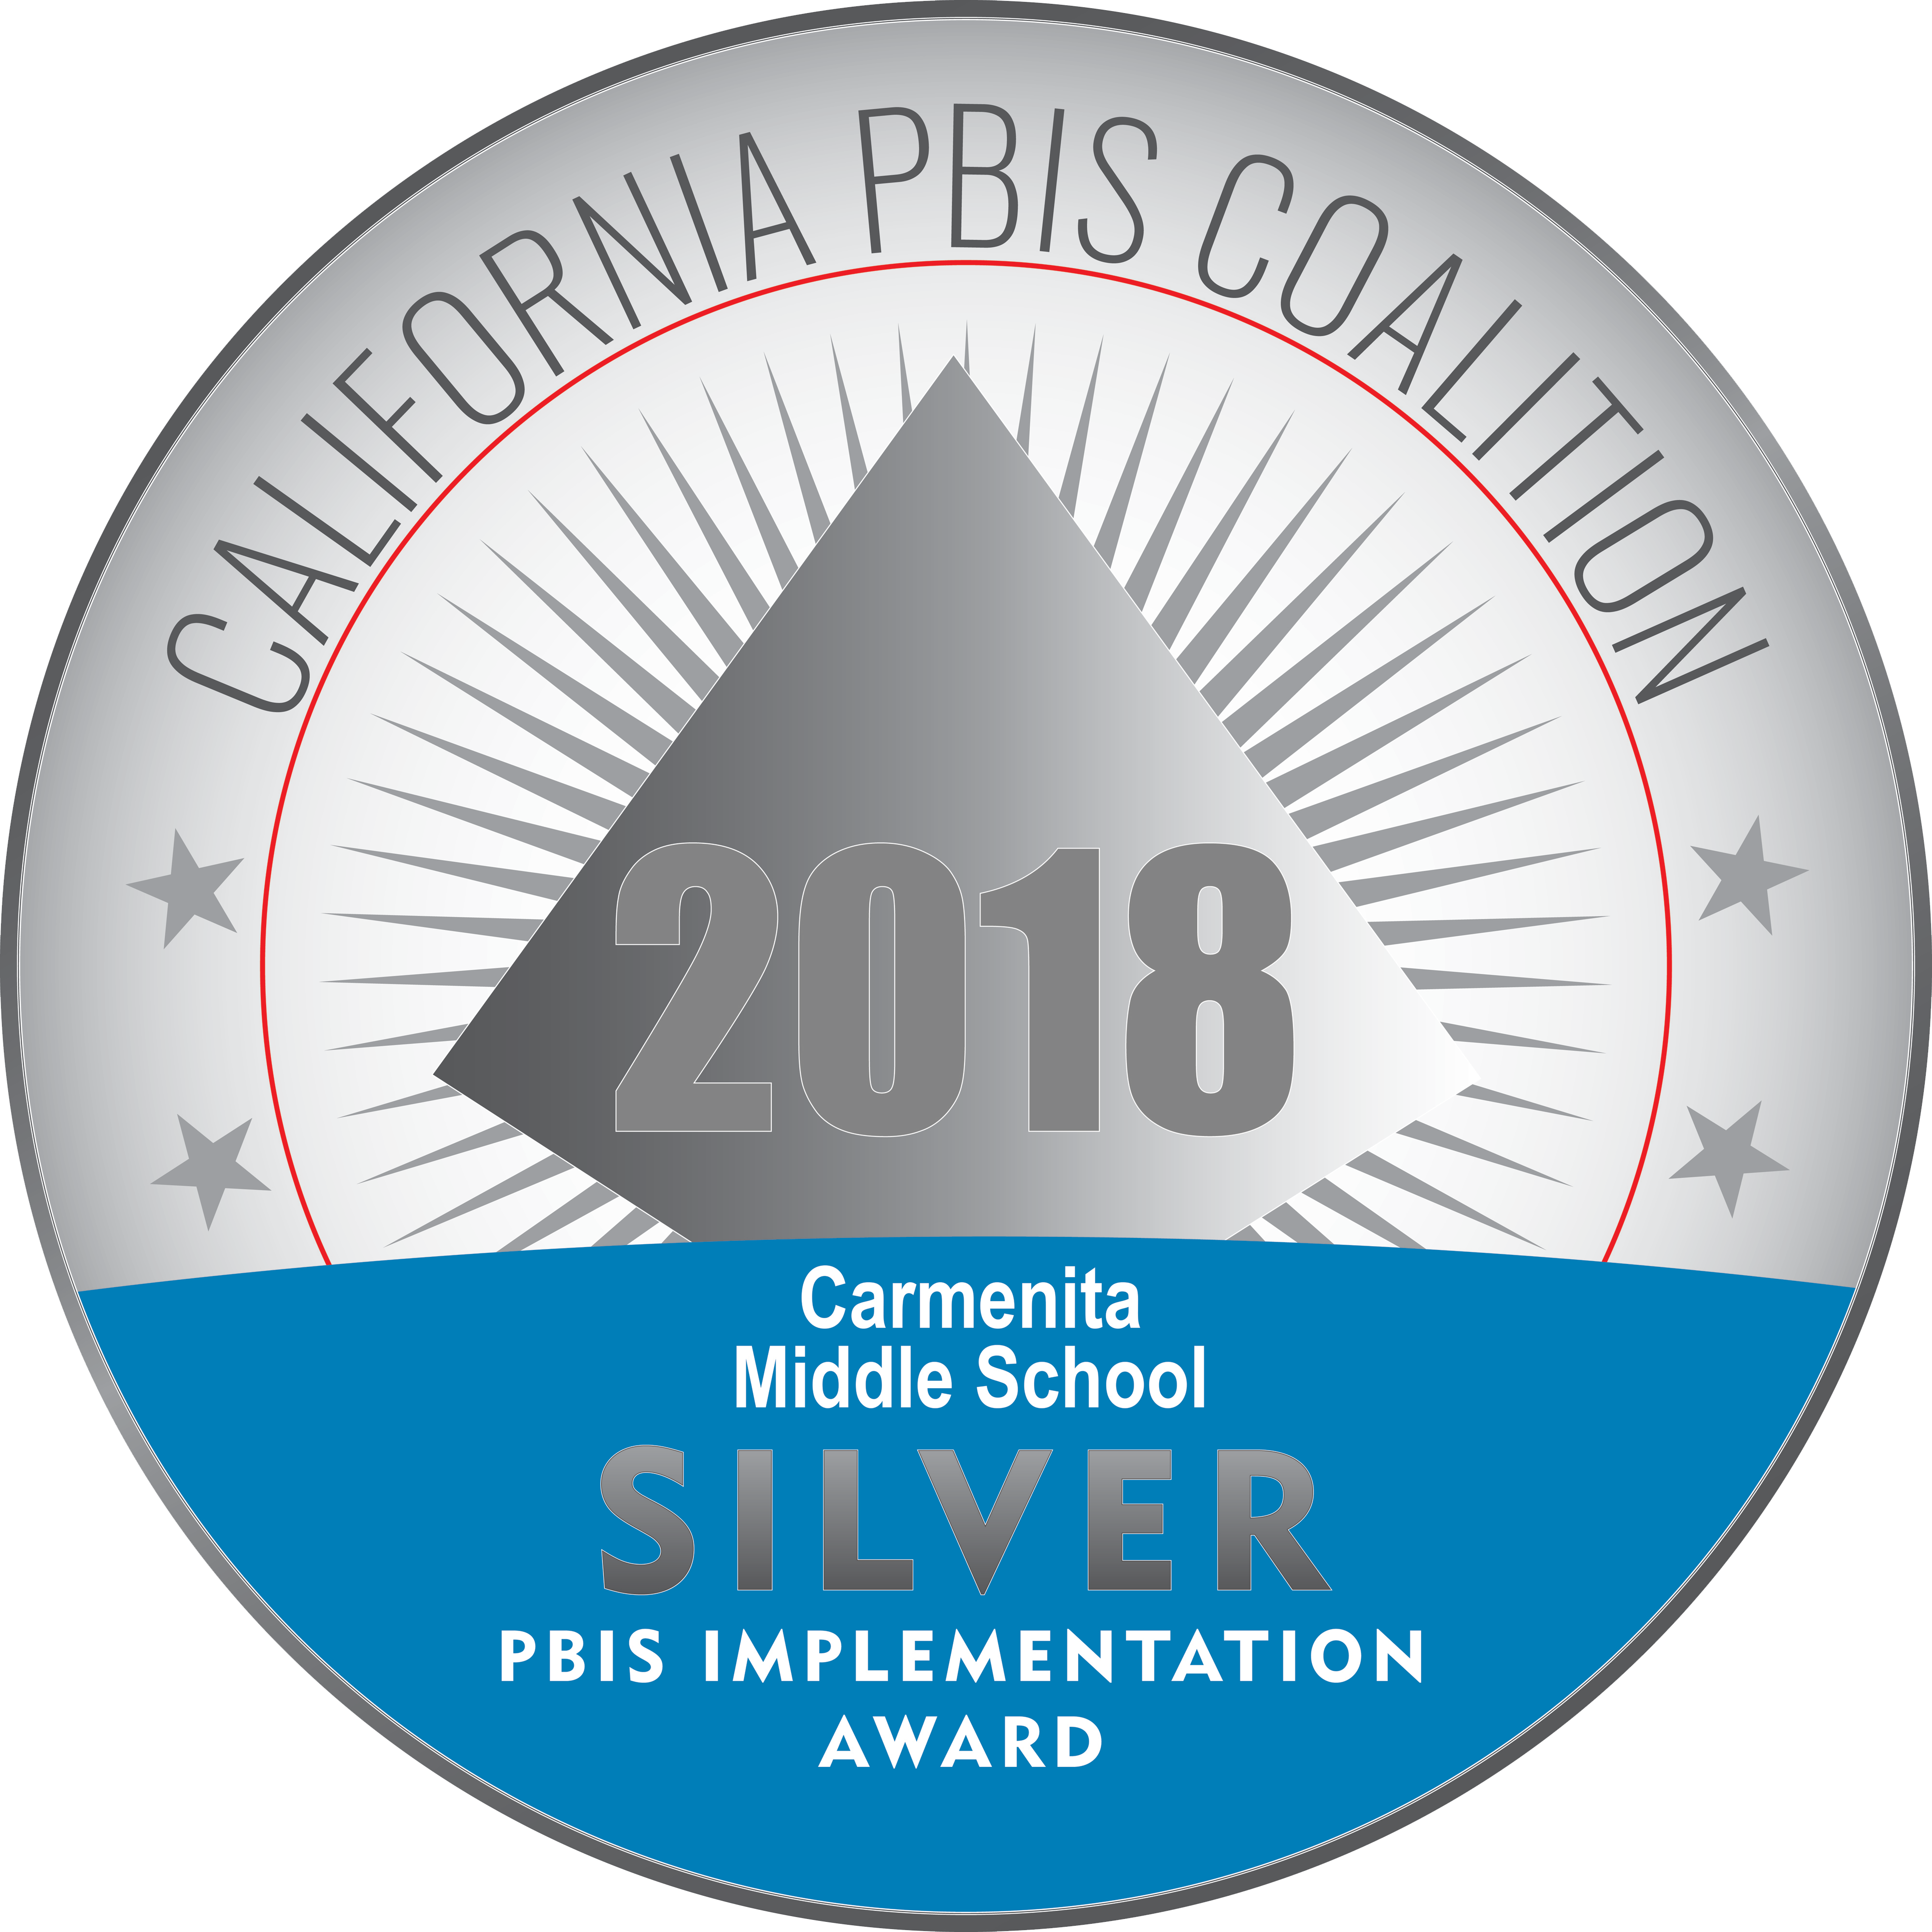 California Pbis Coalition Silver Medal (4000x4000), Png Download